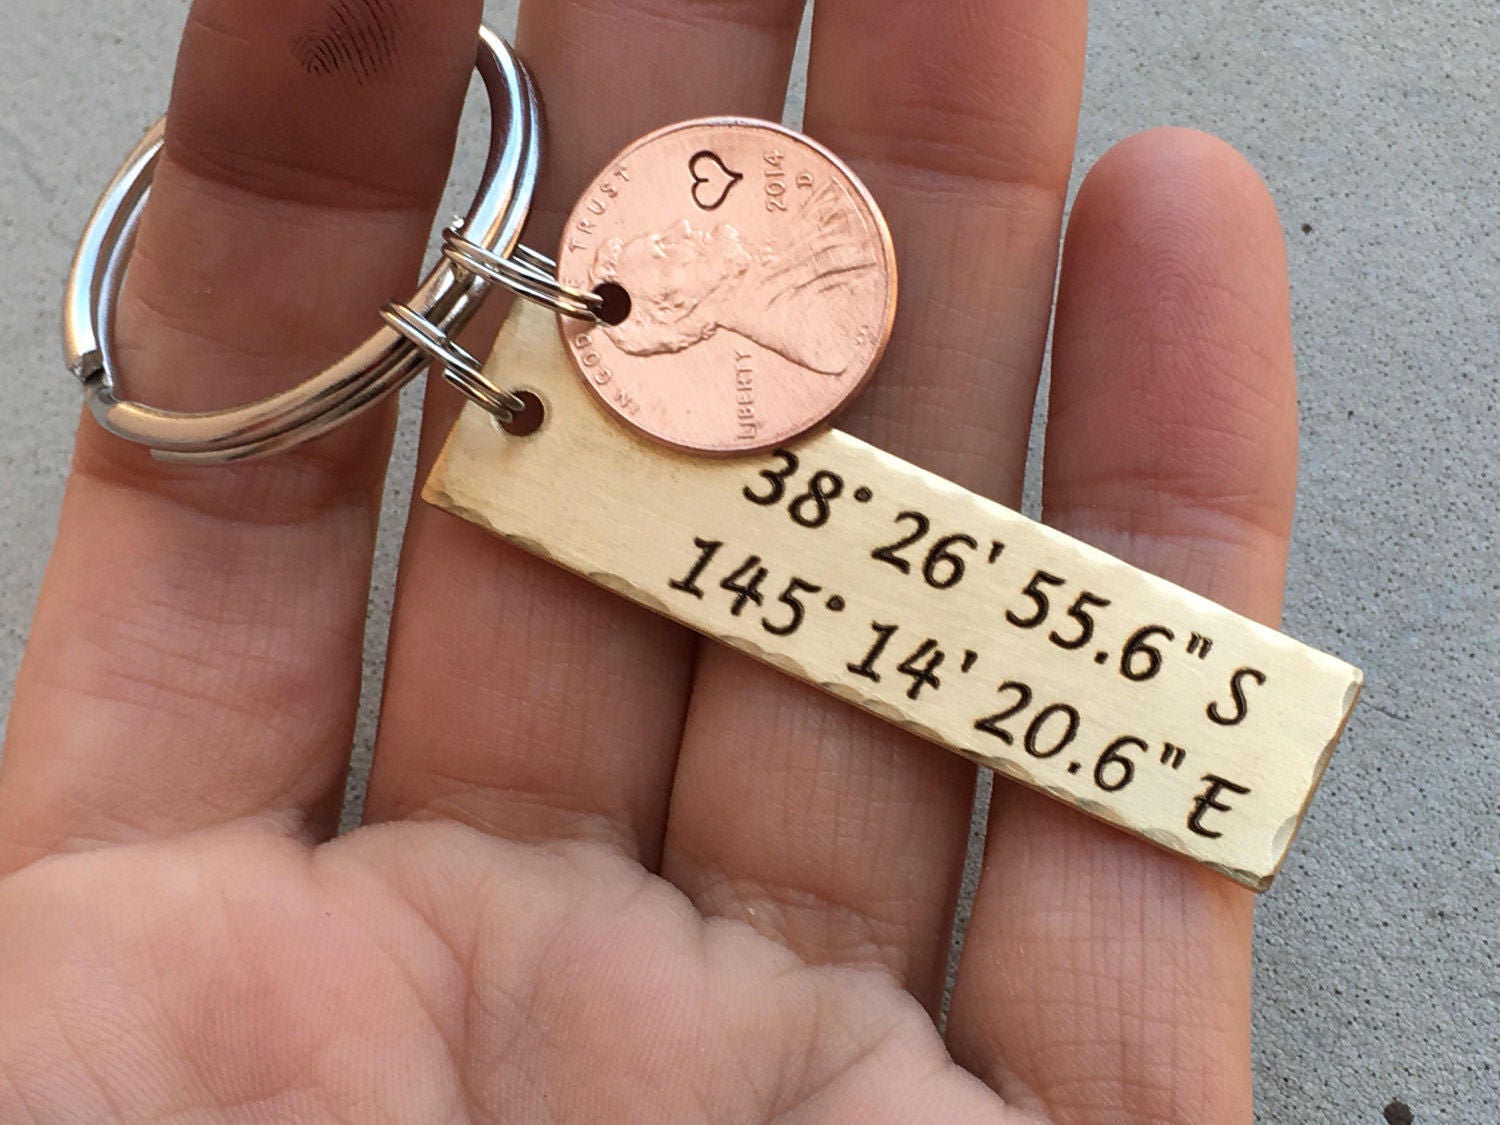 Sale Price Boyfriend Gift - Coordinate Keychain with Lucky Penny - Anniversary Gift, Coordinate Keychain, personalized penny, Lucky Us Keych